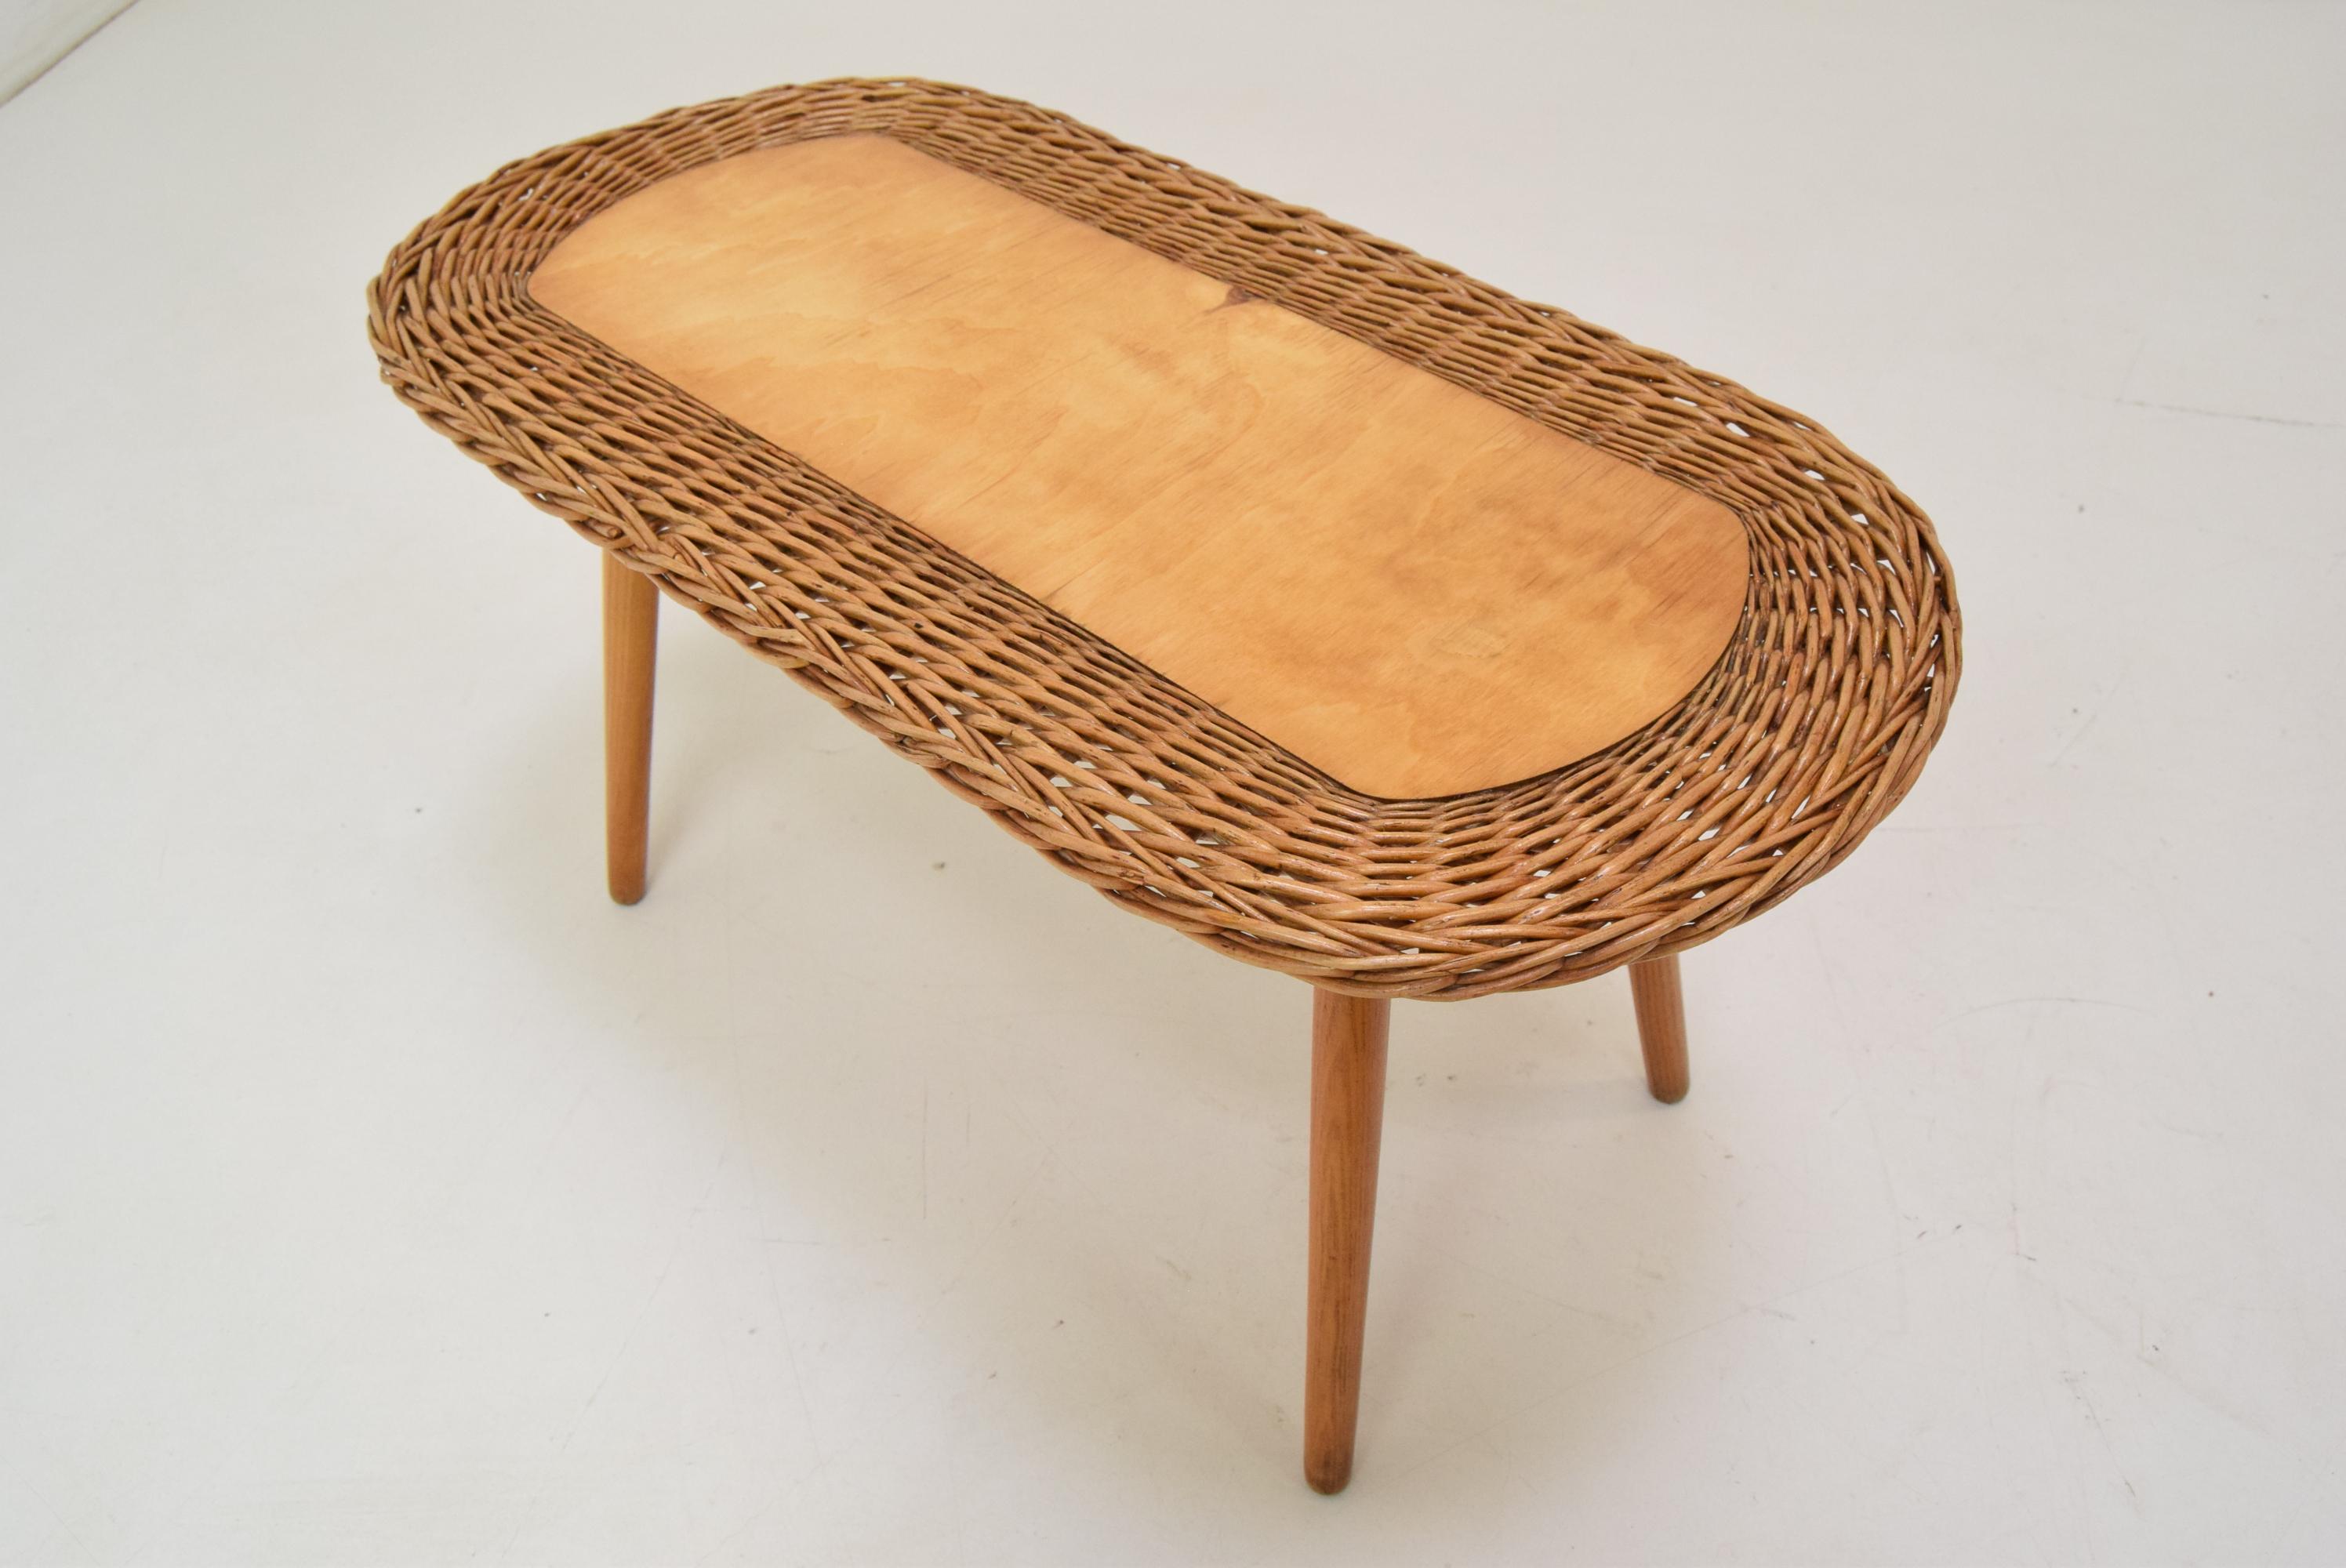 Made in Czechoslovakia
Made of Wood,Rattan
Good Original condition.